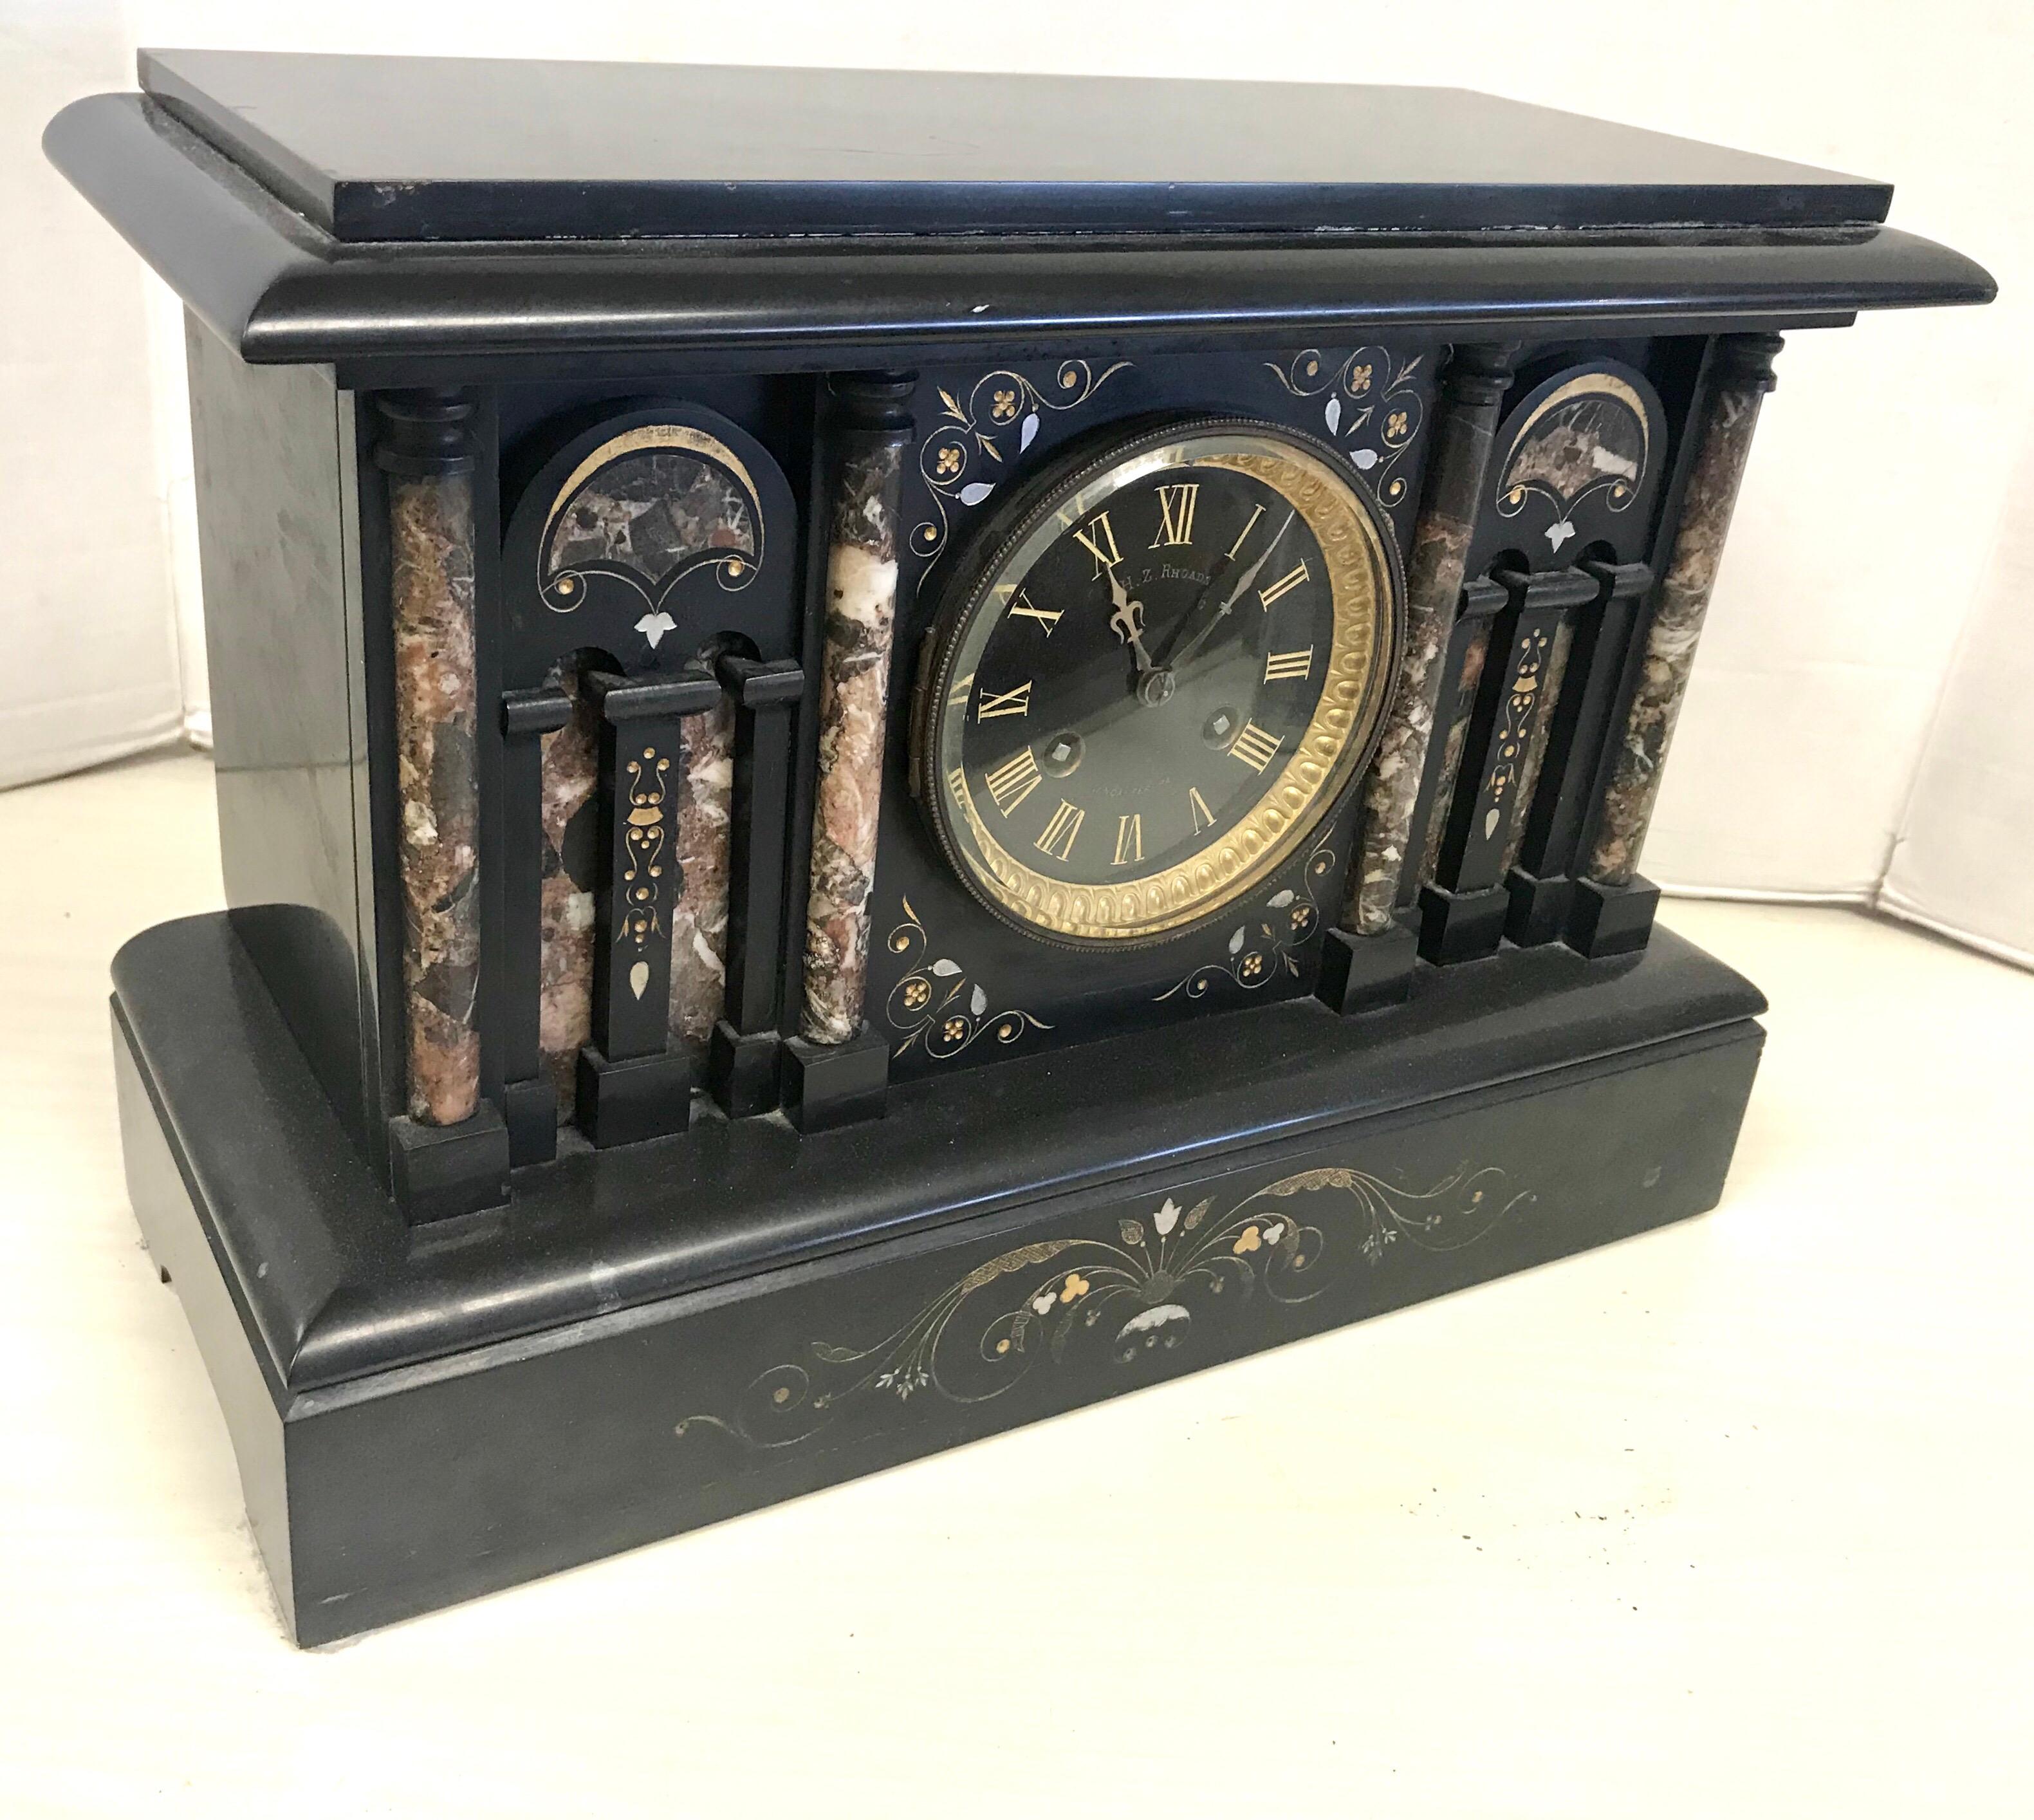 Late 19th Century Black Marble Victorian Mantle Key-Wind Clock with Inlay